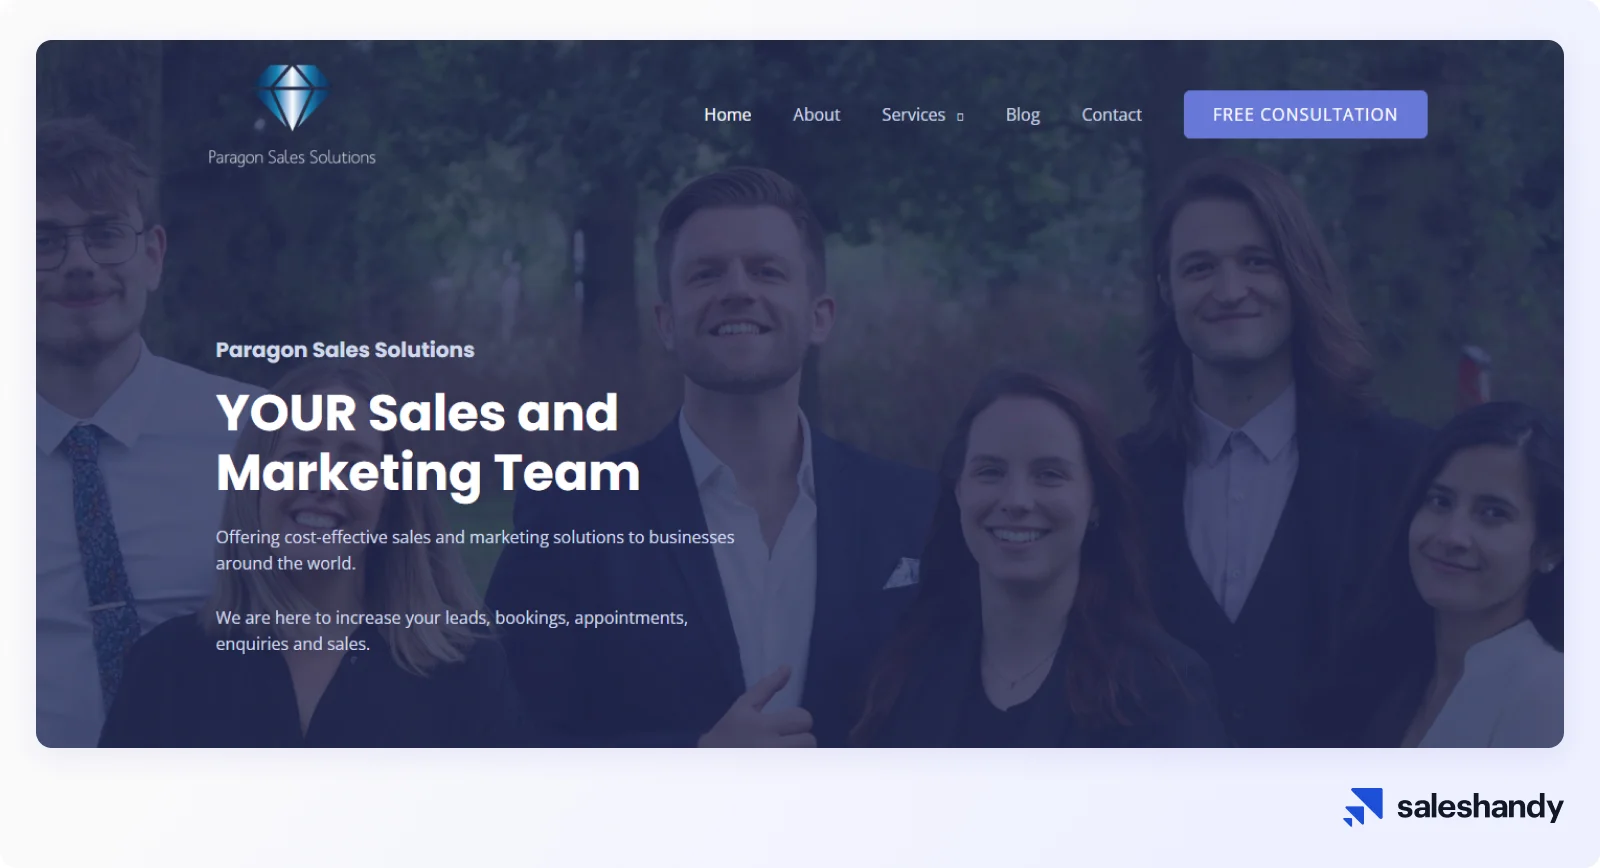 Paragon Sales Solution is a lead generation agency in the UK.